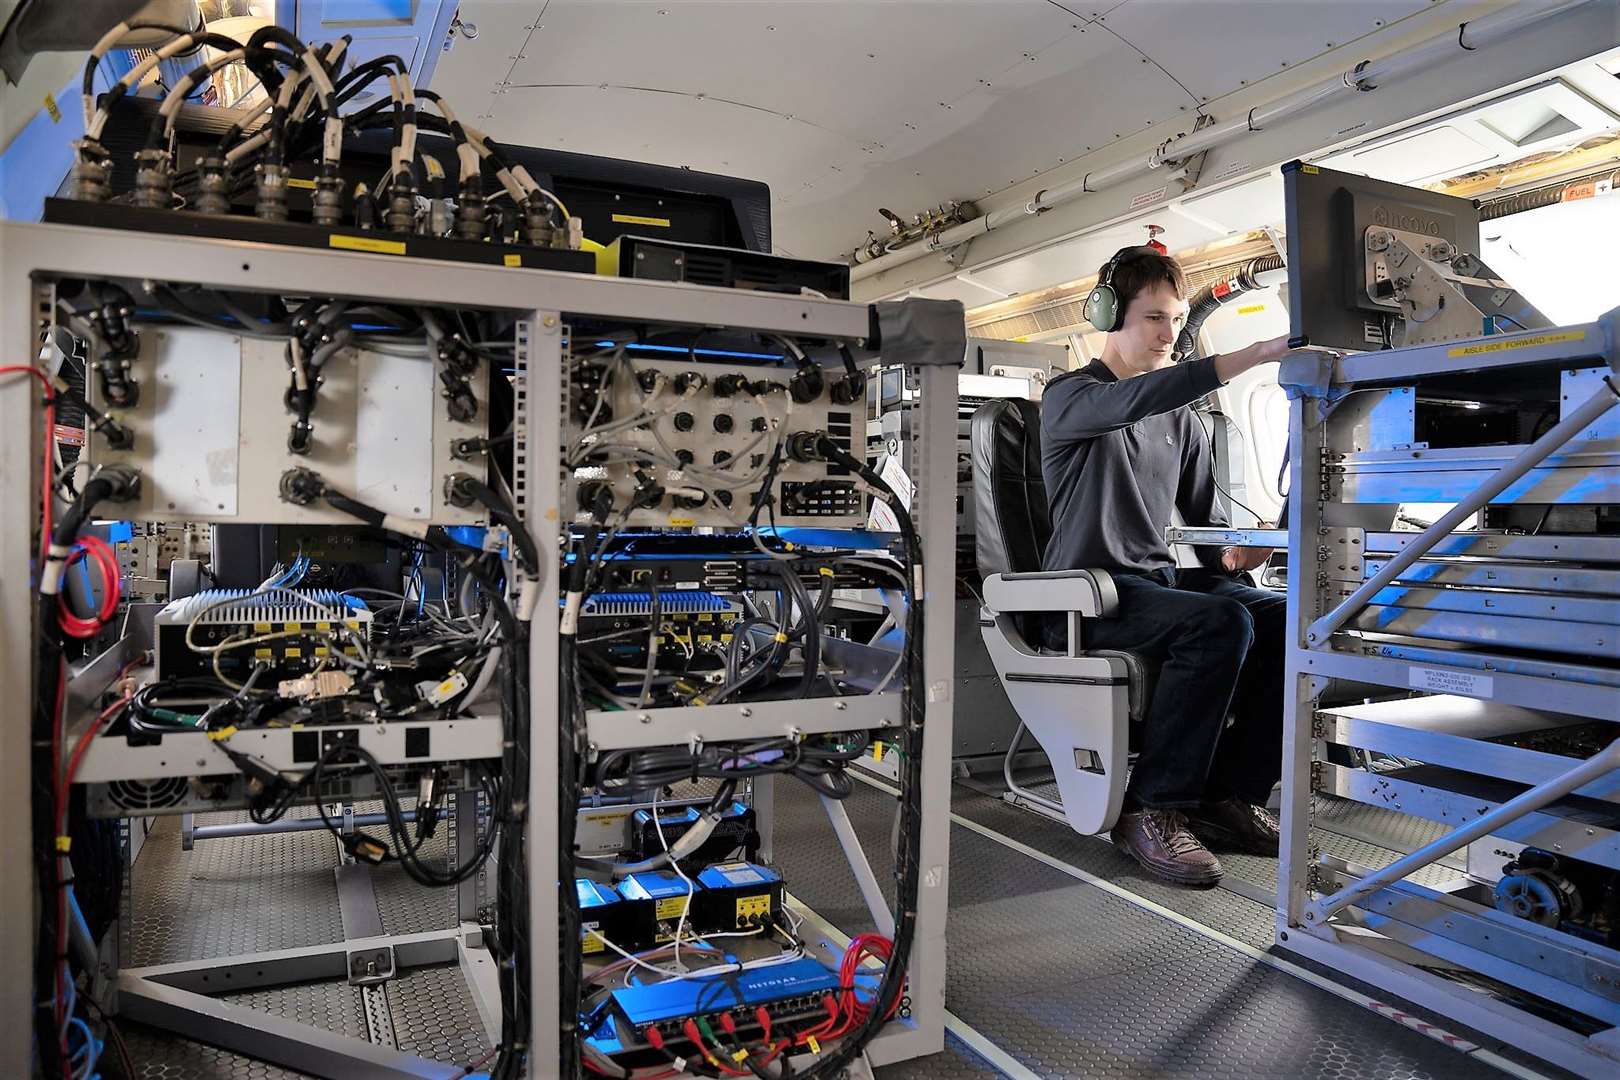 Some of the instrumentation within the aircraft. Picture: National Centre for Atmospheric Science